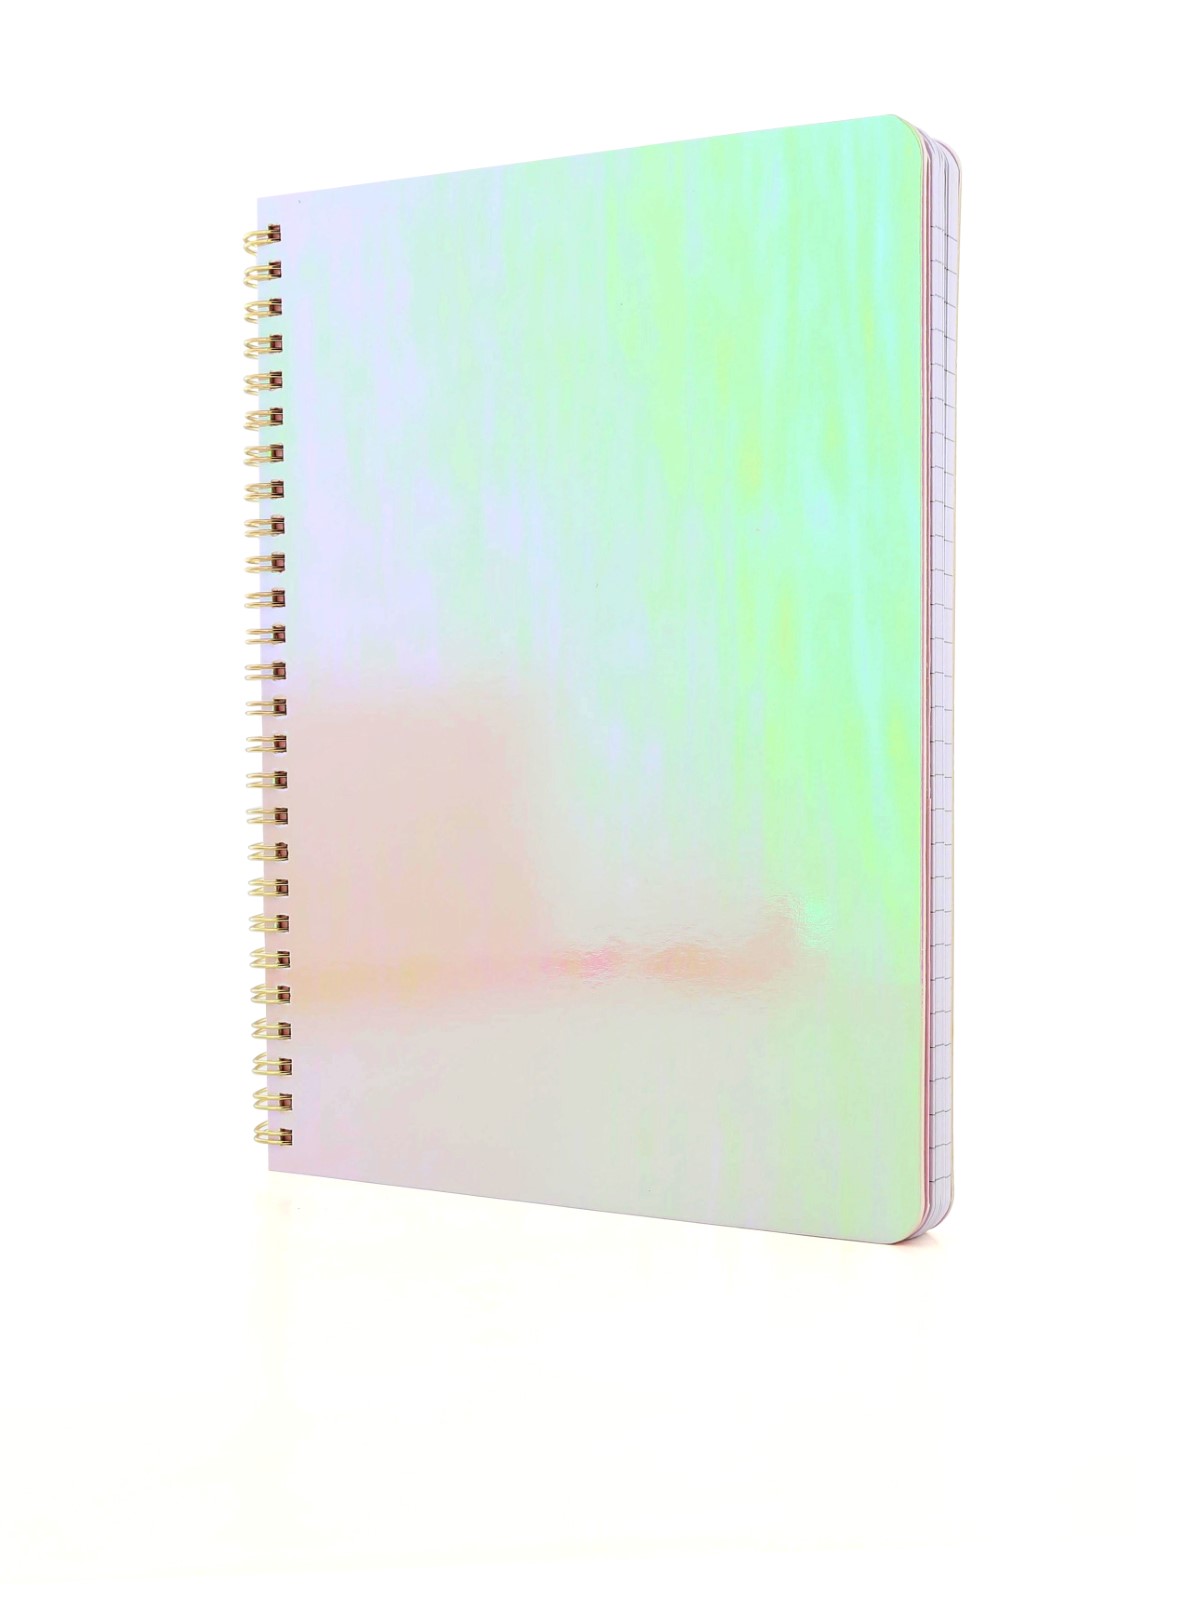 Ban.do Rough Draft Mini Notebook Pearlescent